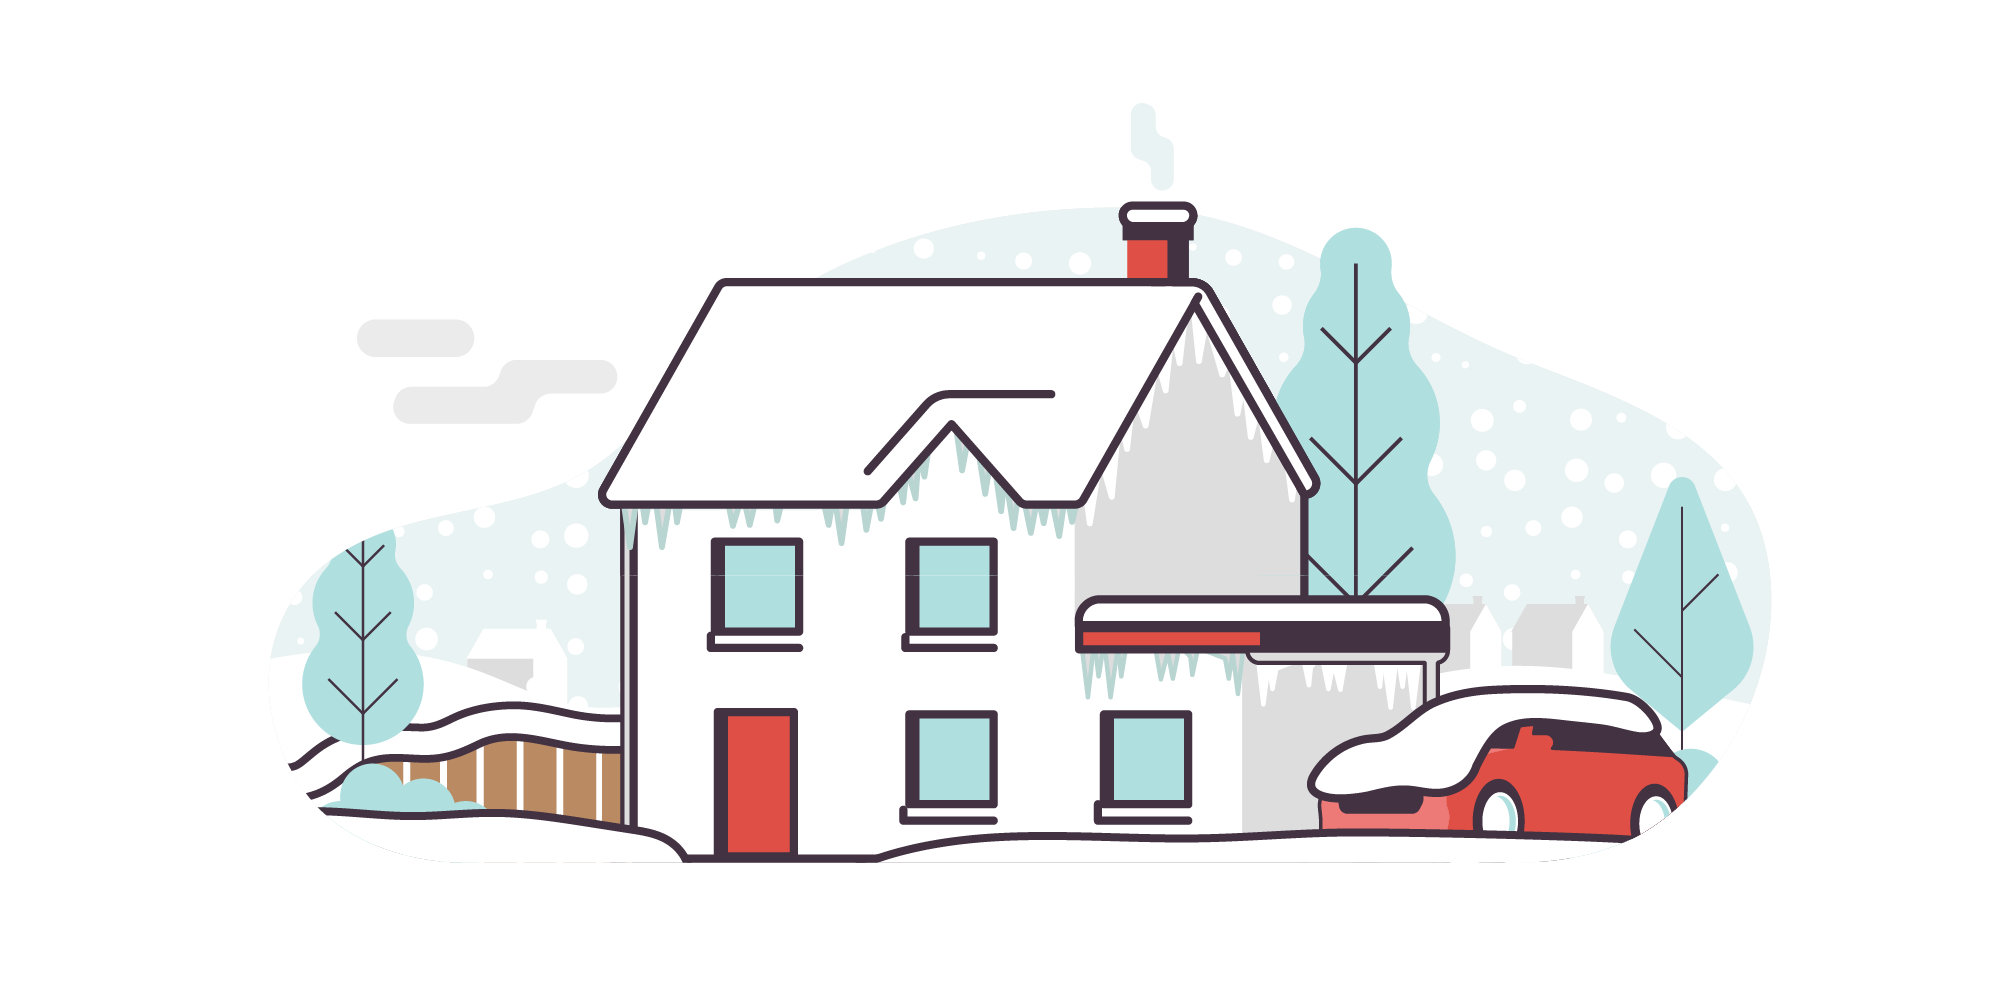 Illustration of a house, garden and car with snow on the roofs